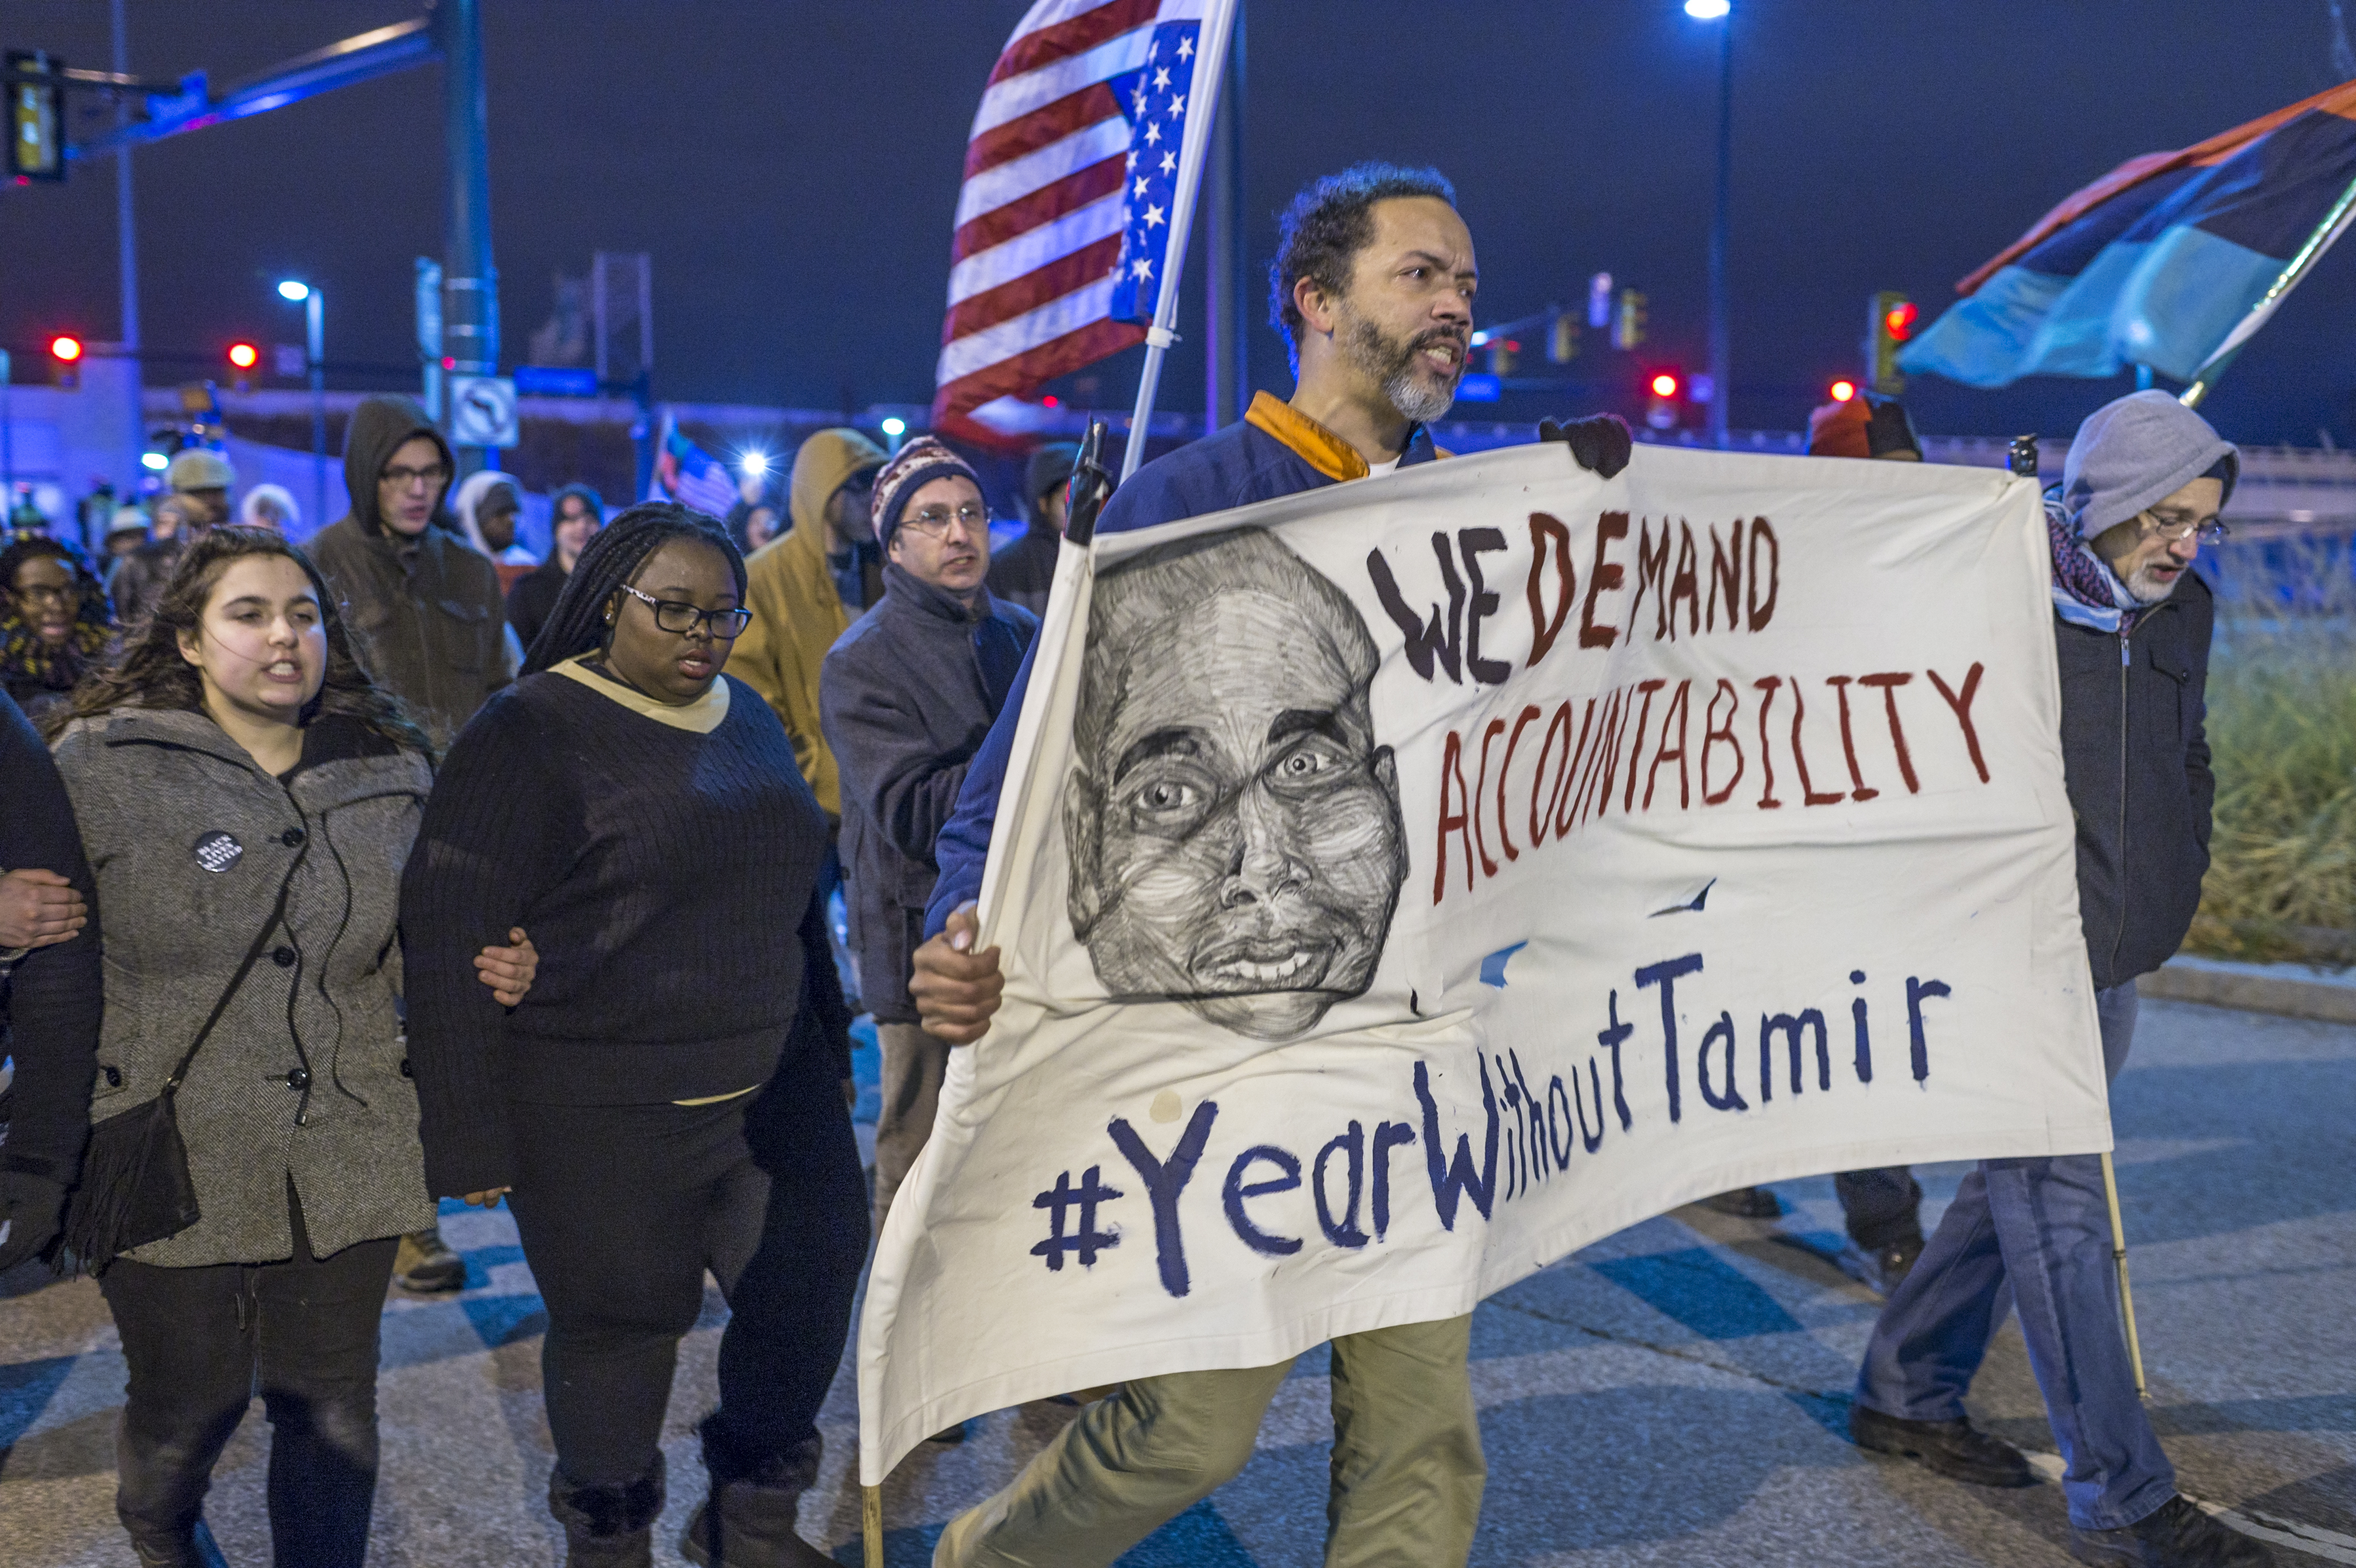 Demonstrators march  in Cleveland, Ohio, on Dec. 29, 2015. (Angelo Merendino—Getty Images)